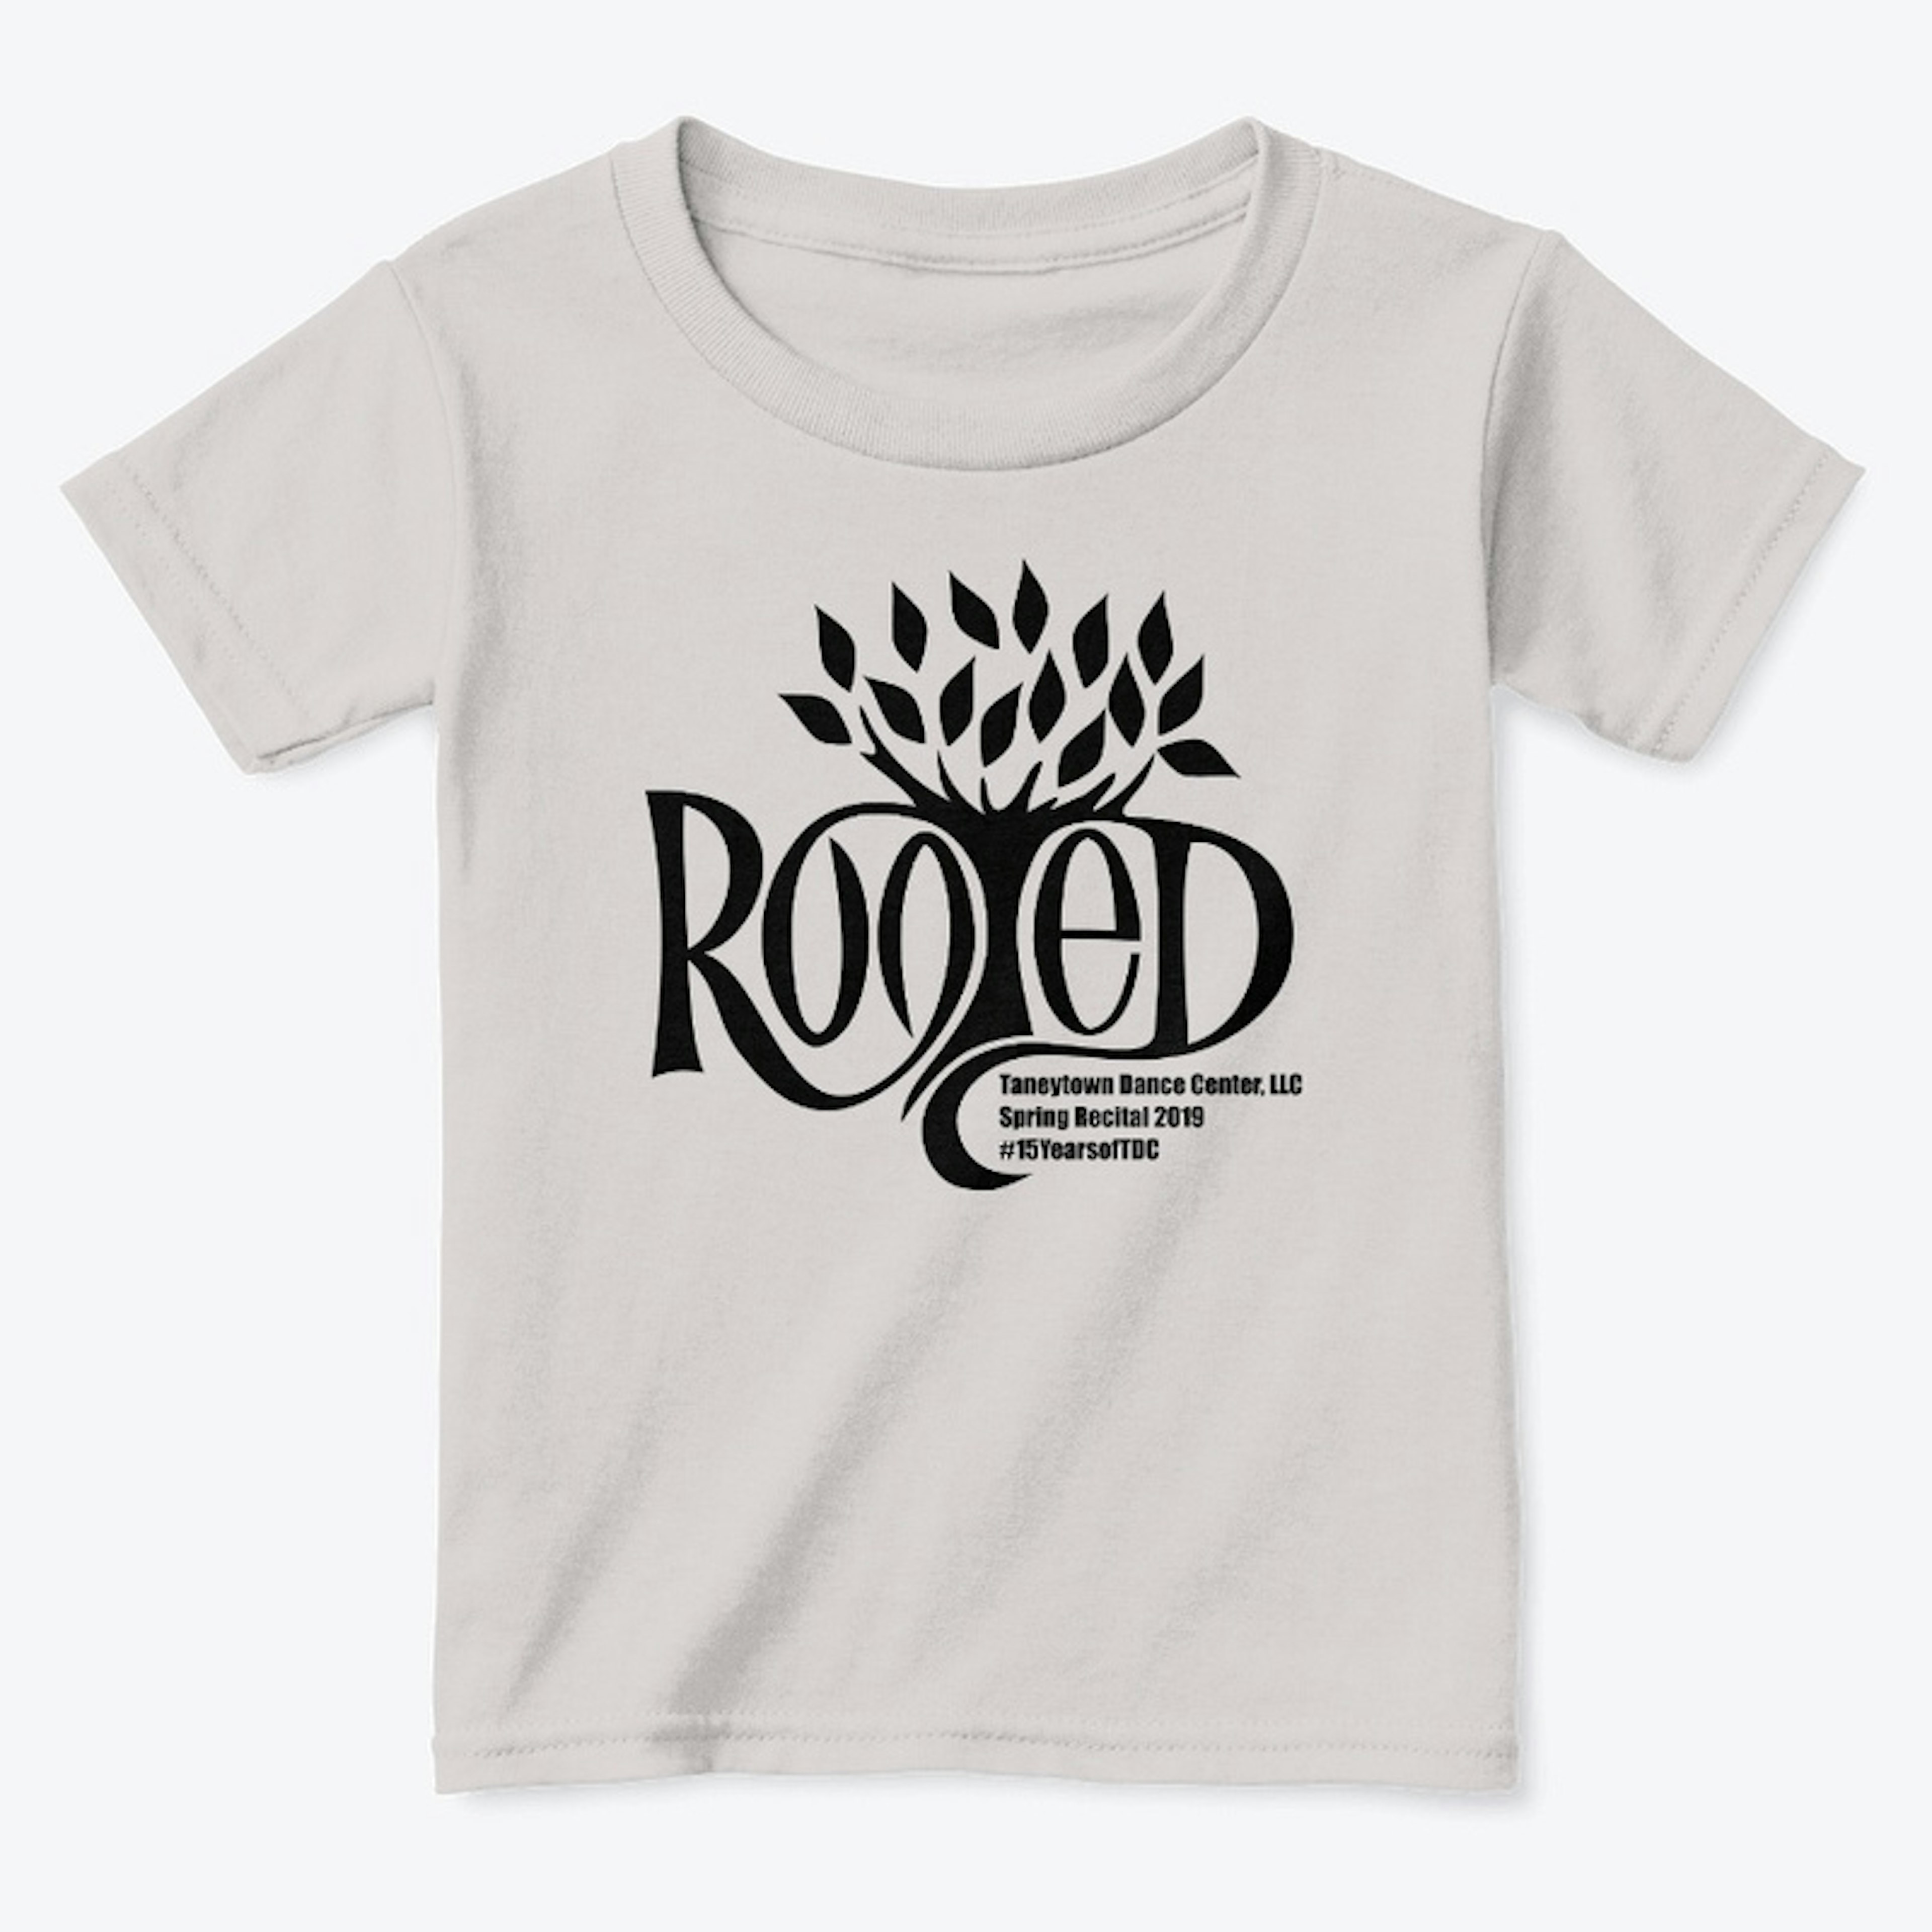 Rooted- 2019 TDC Recital Wear